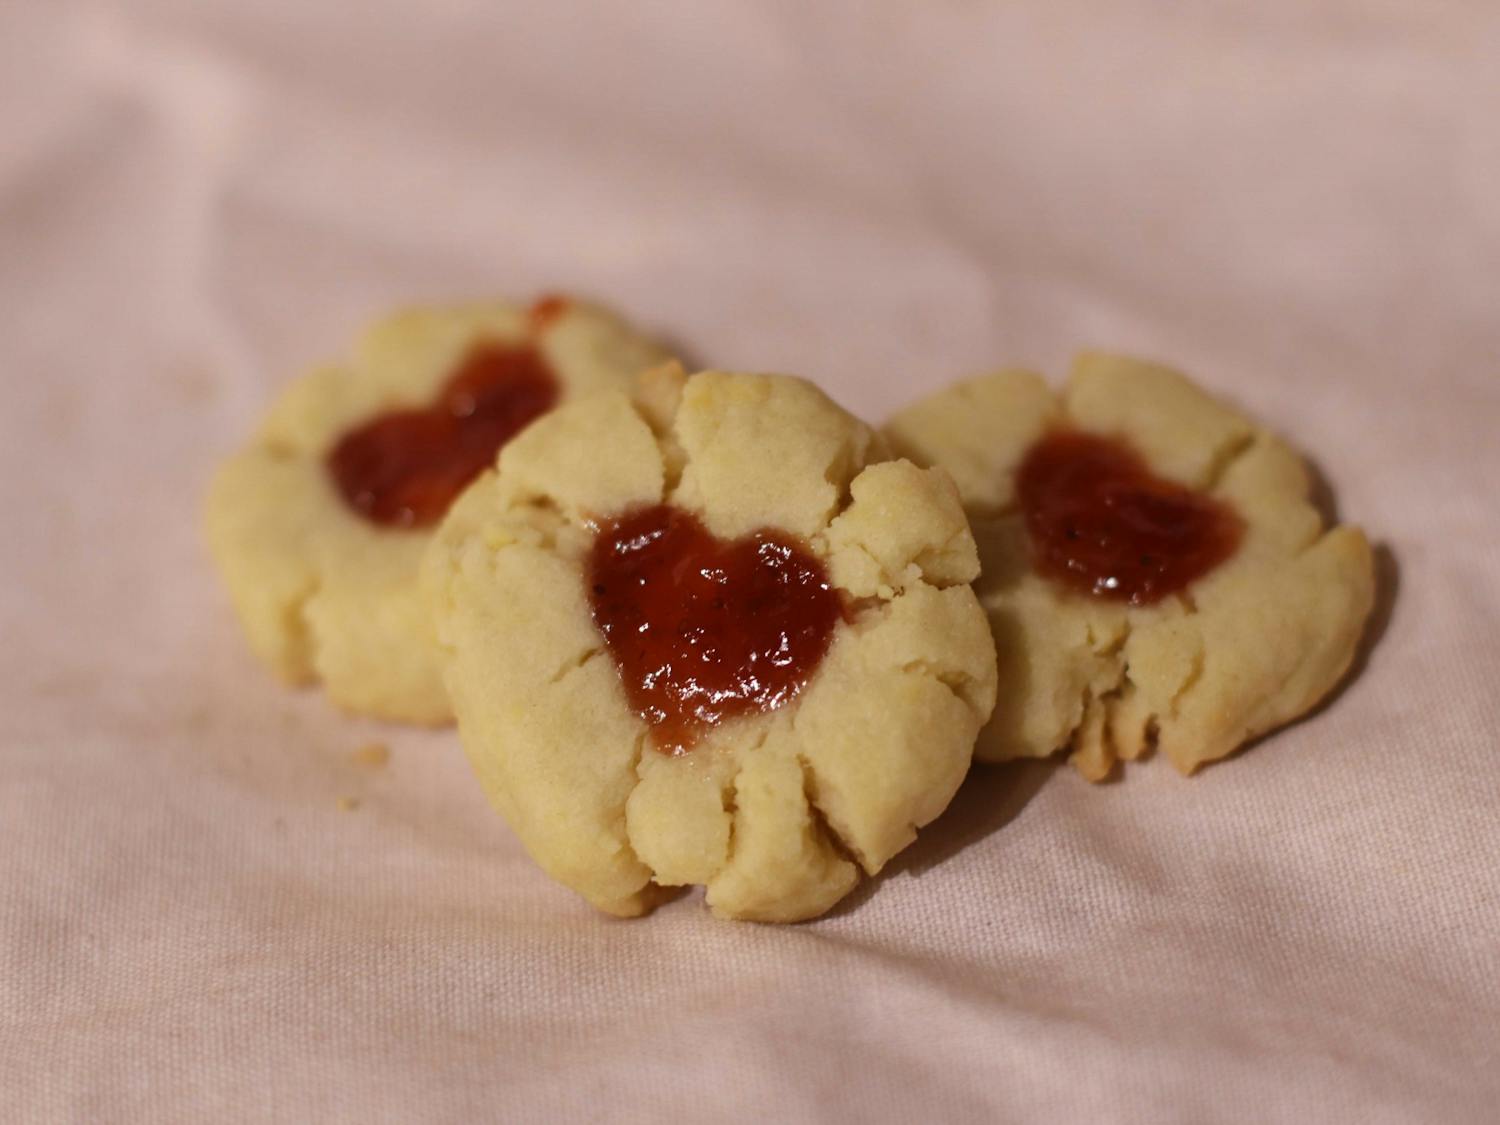 Raspberry jam cookies made by Amelia Farrell on Feb. 8, 2022. The cookies bring a unique twist to the classic, buttery shortbread cookie by adding raspberry jam to form the heart center, making it a perfect snack for Valentine's Day.